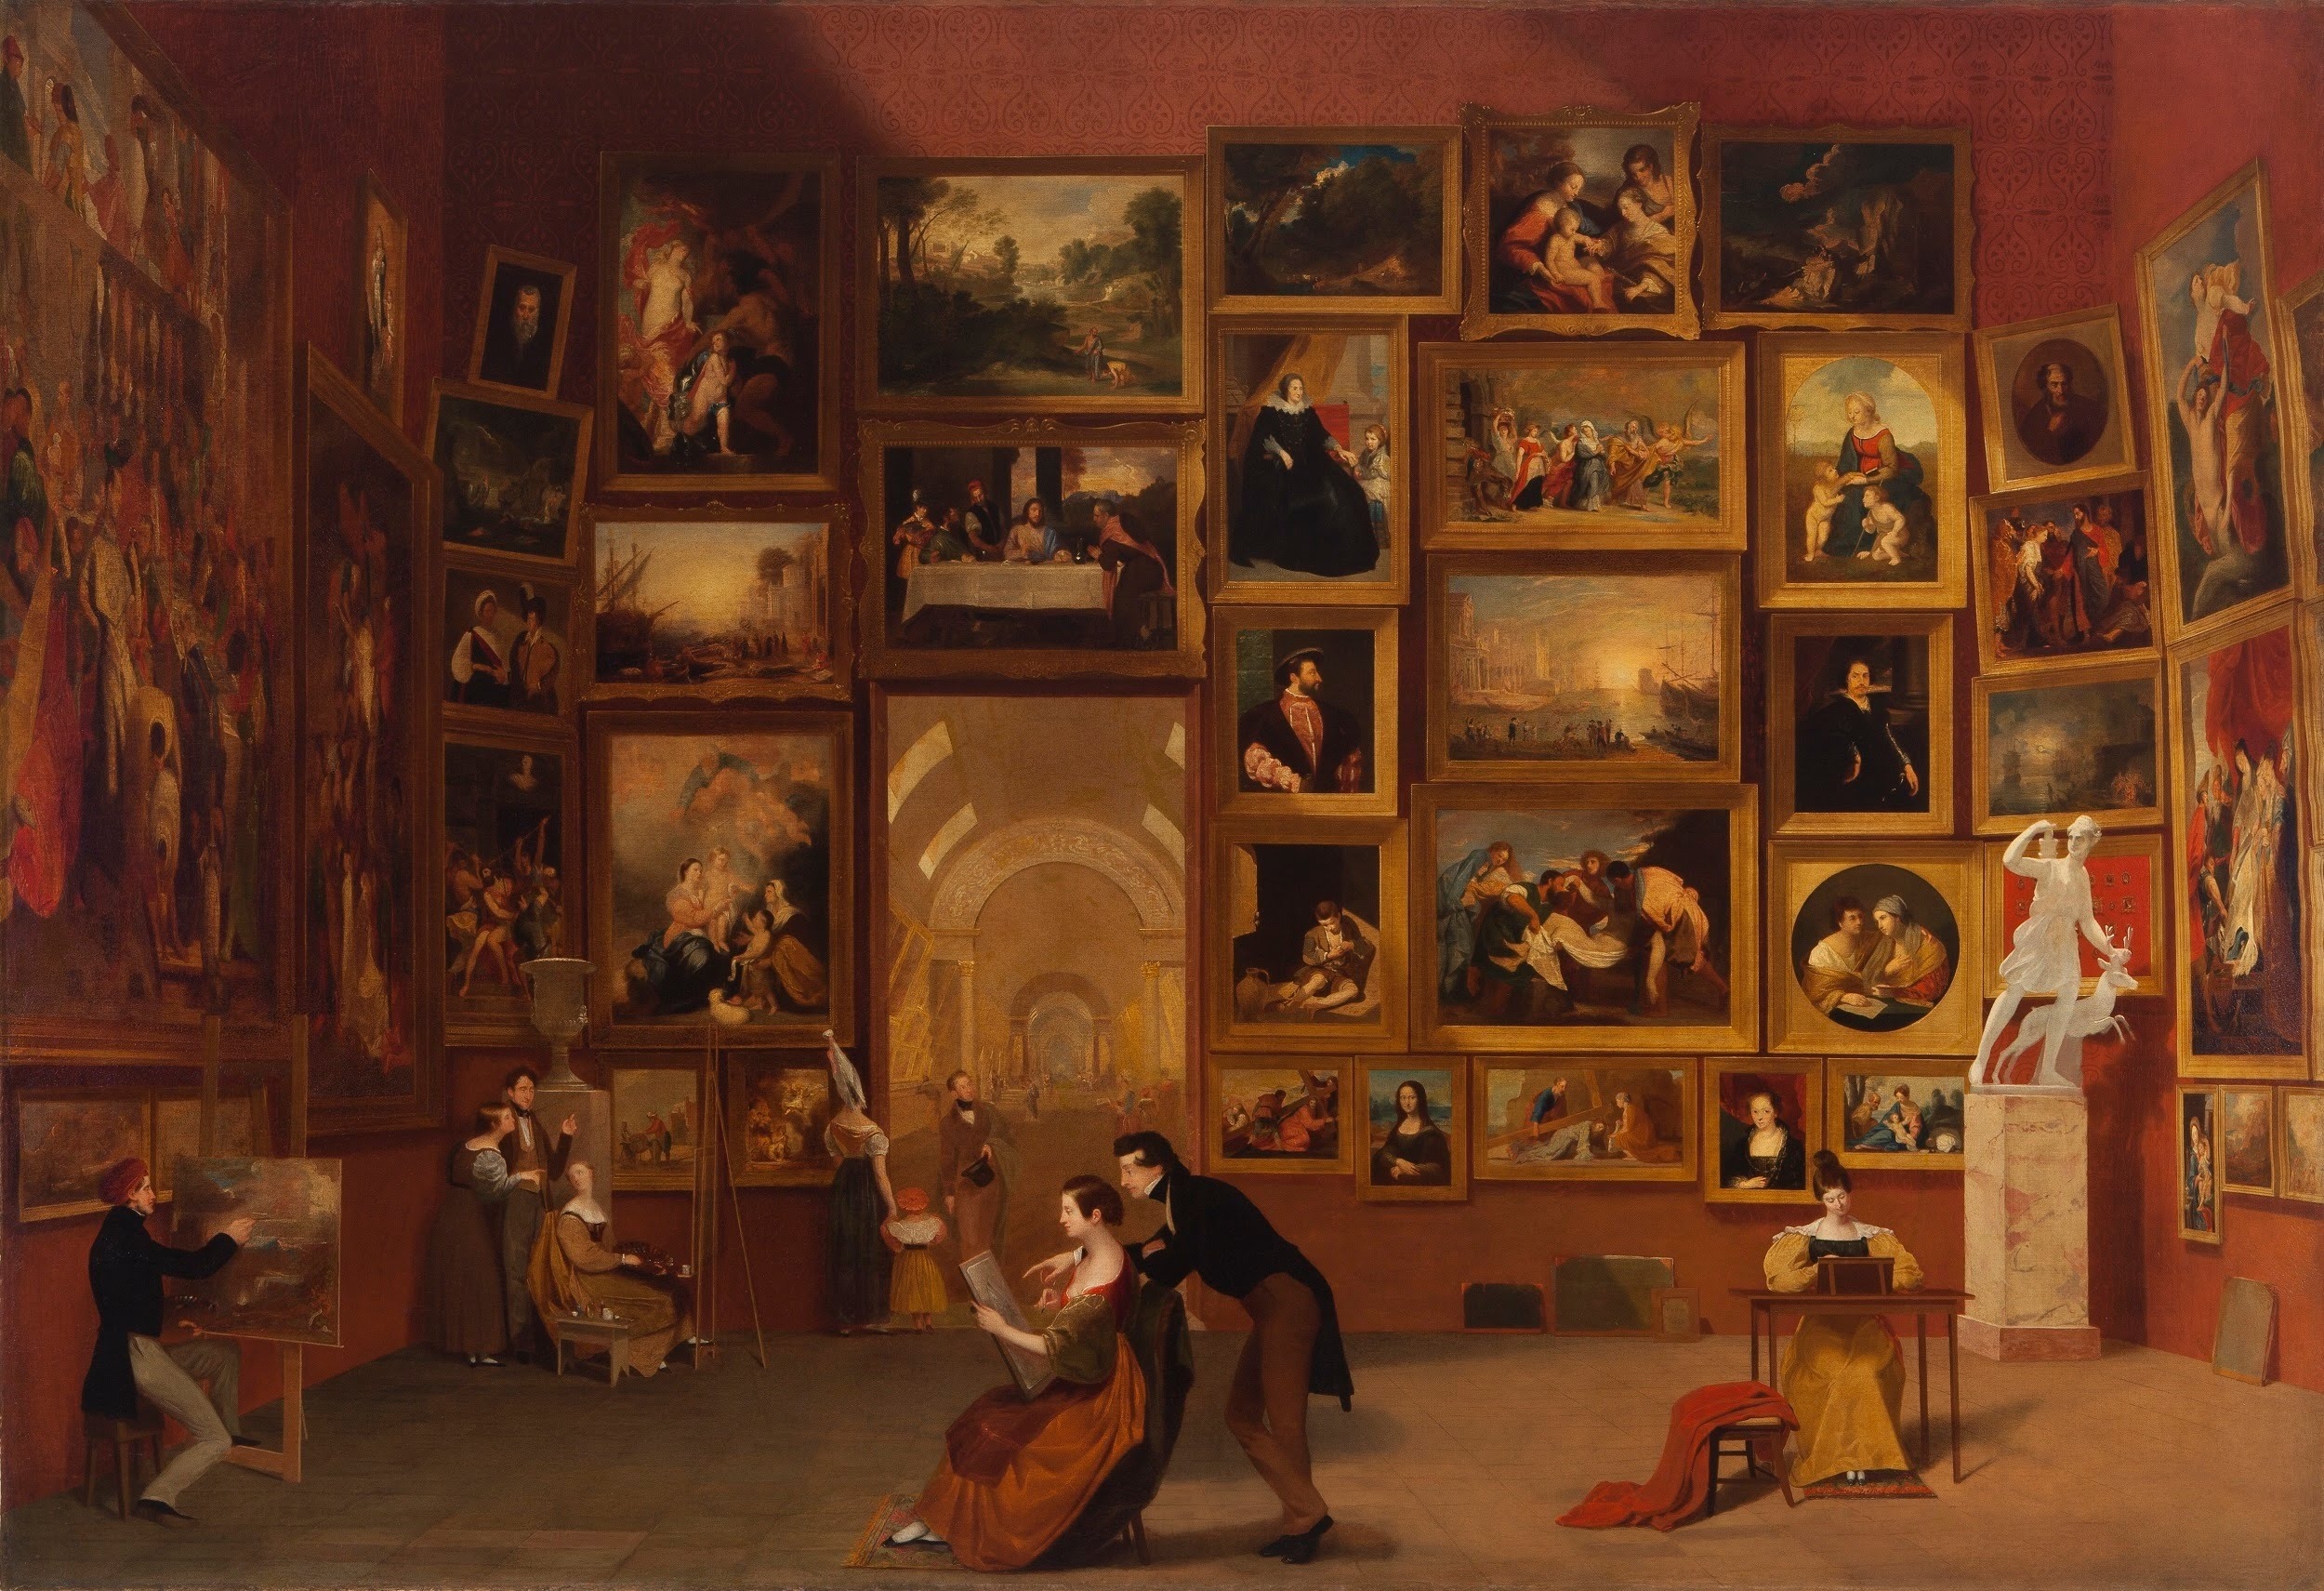 Samuel F. B. Morse's Gallery of the Louvre, 1831-1833